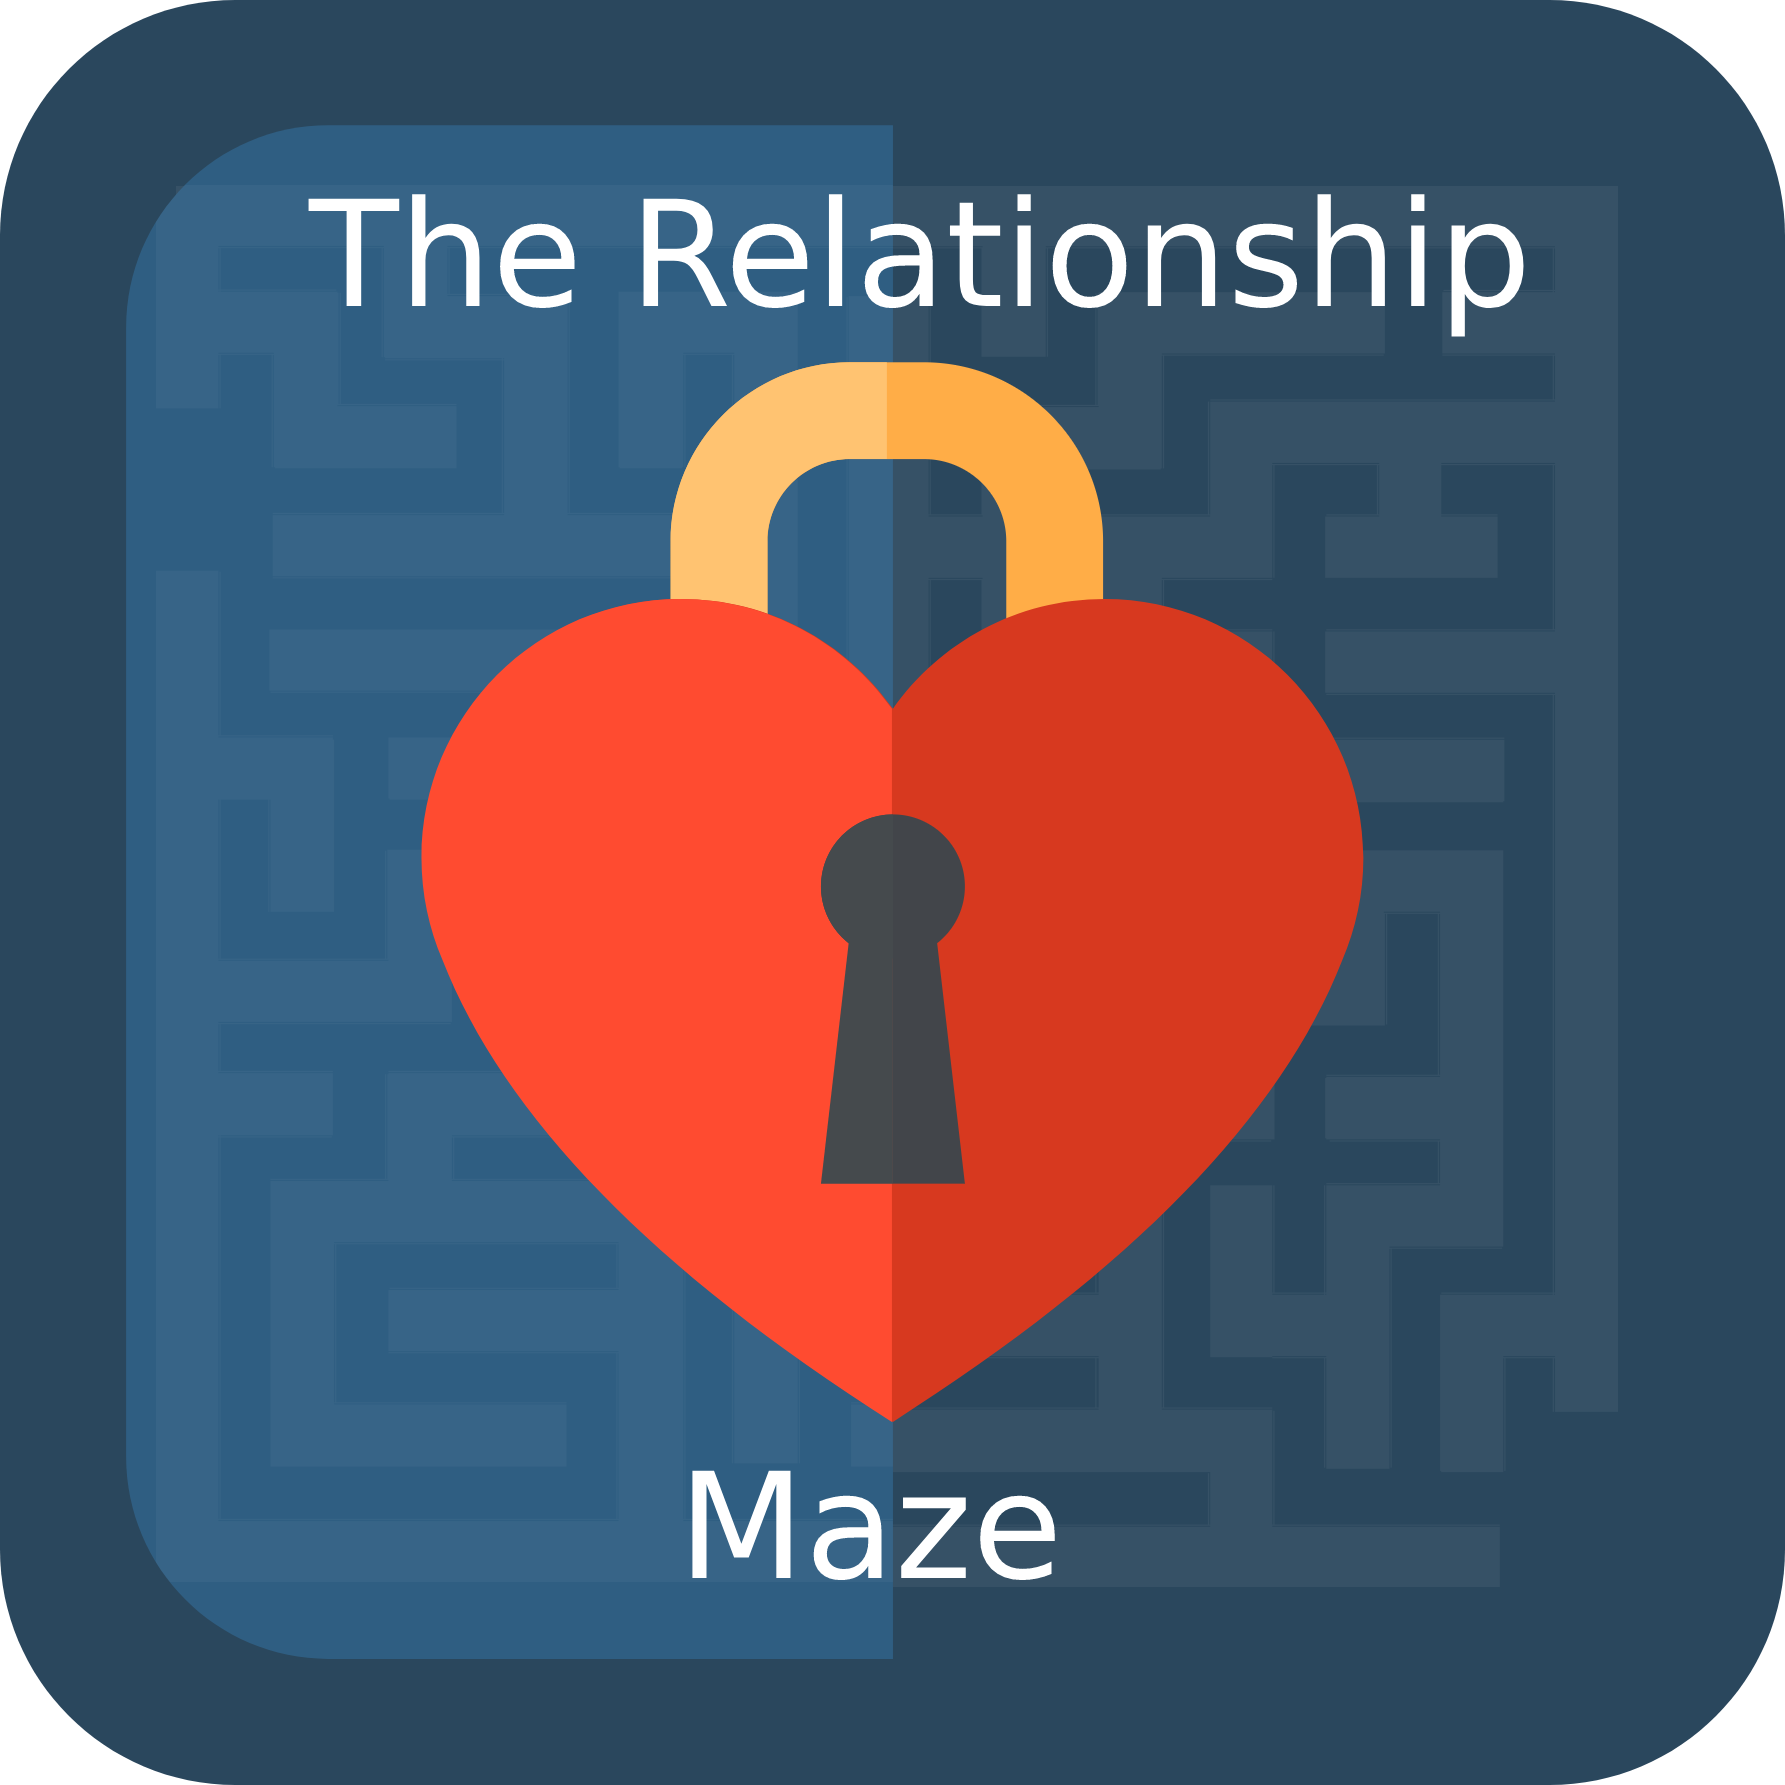 The Relationship Maze